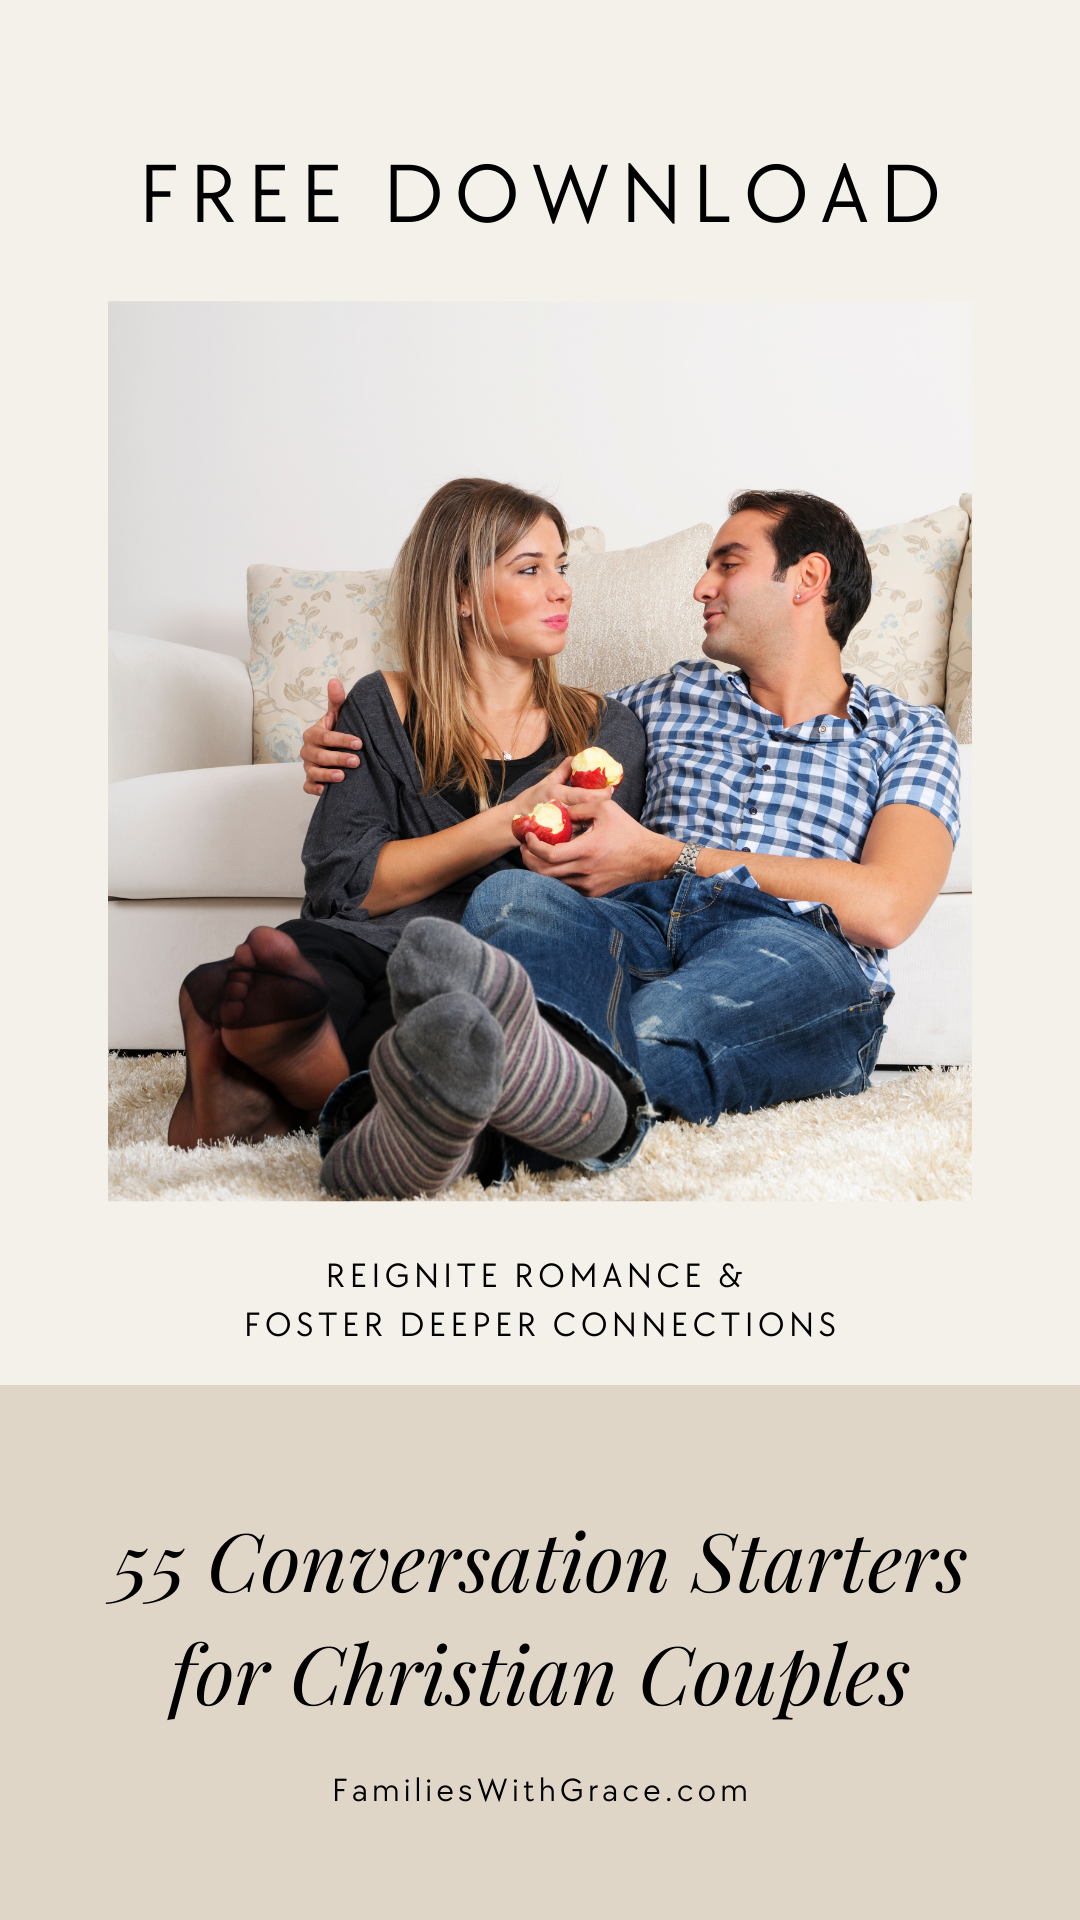 55 Christian conversation starters for couples